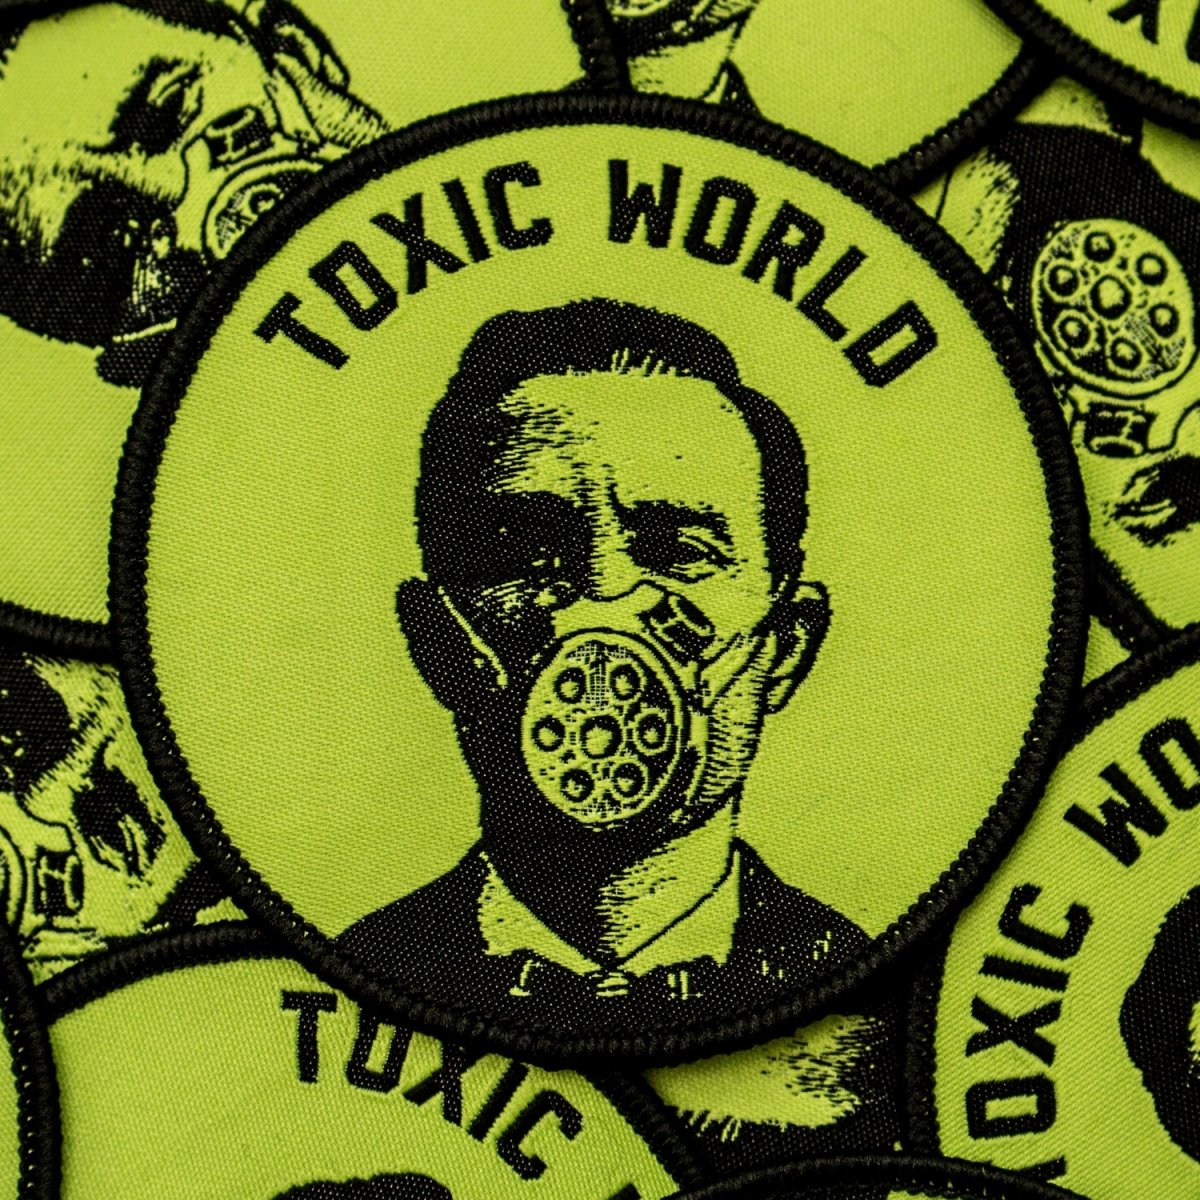 Toxic World Patch - Patch - Pretty Bad Co.